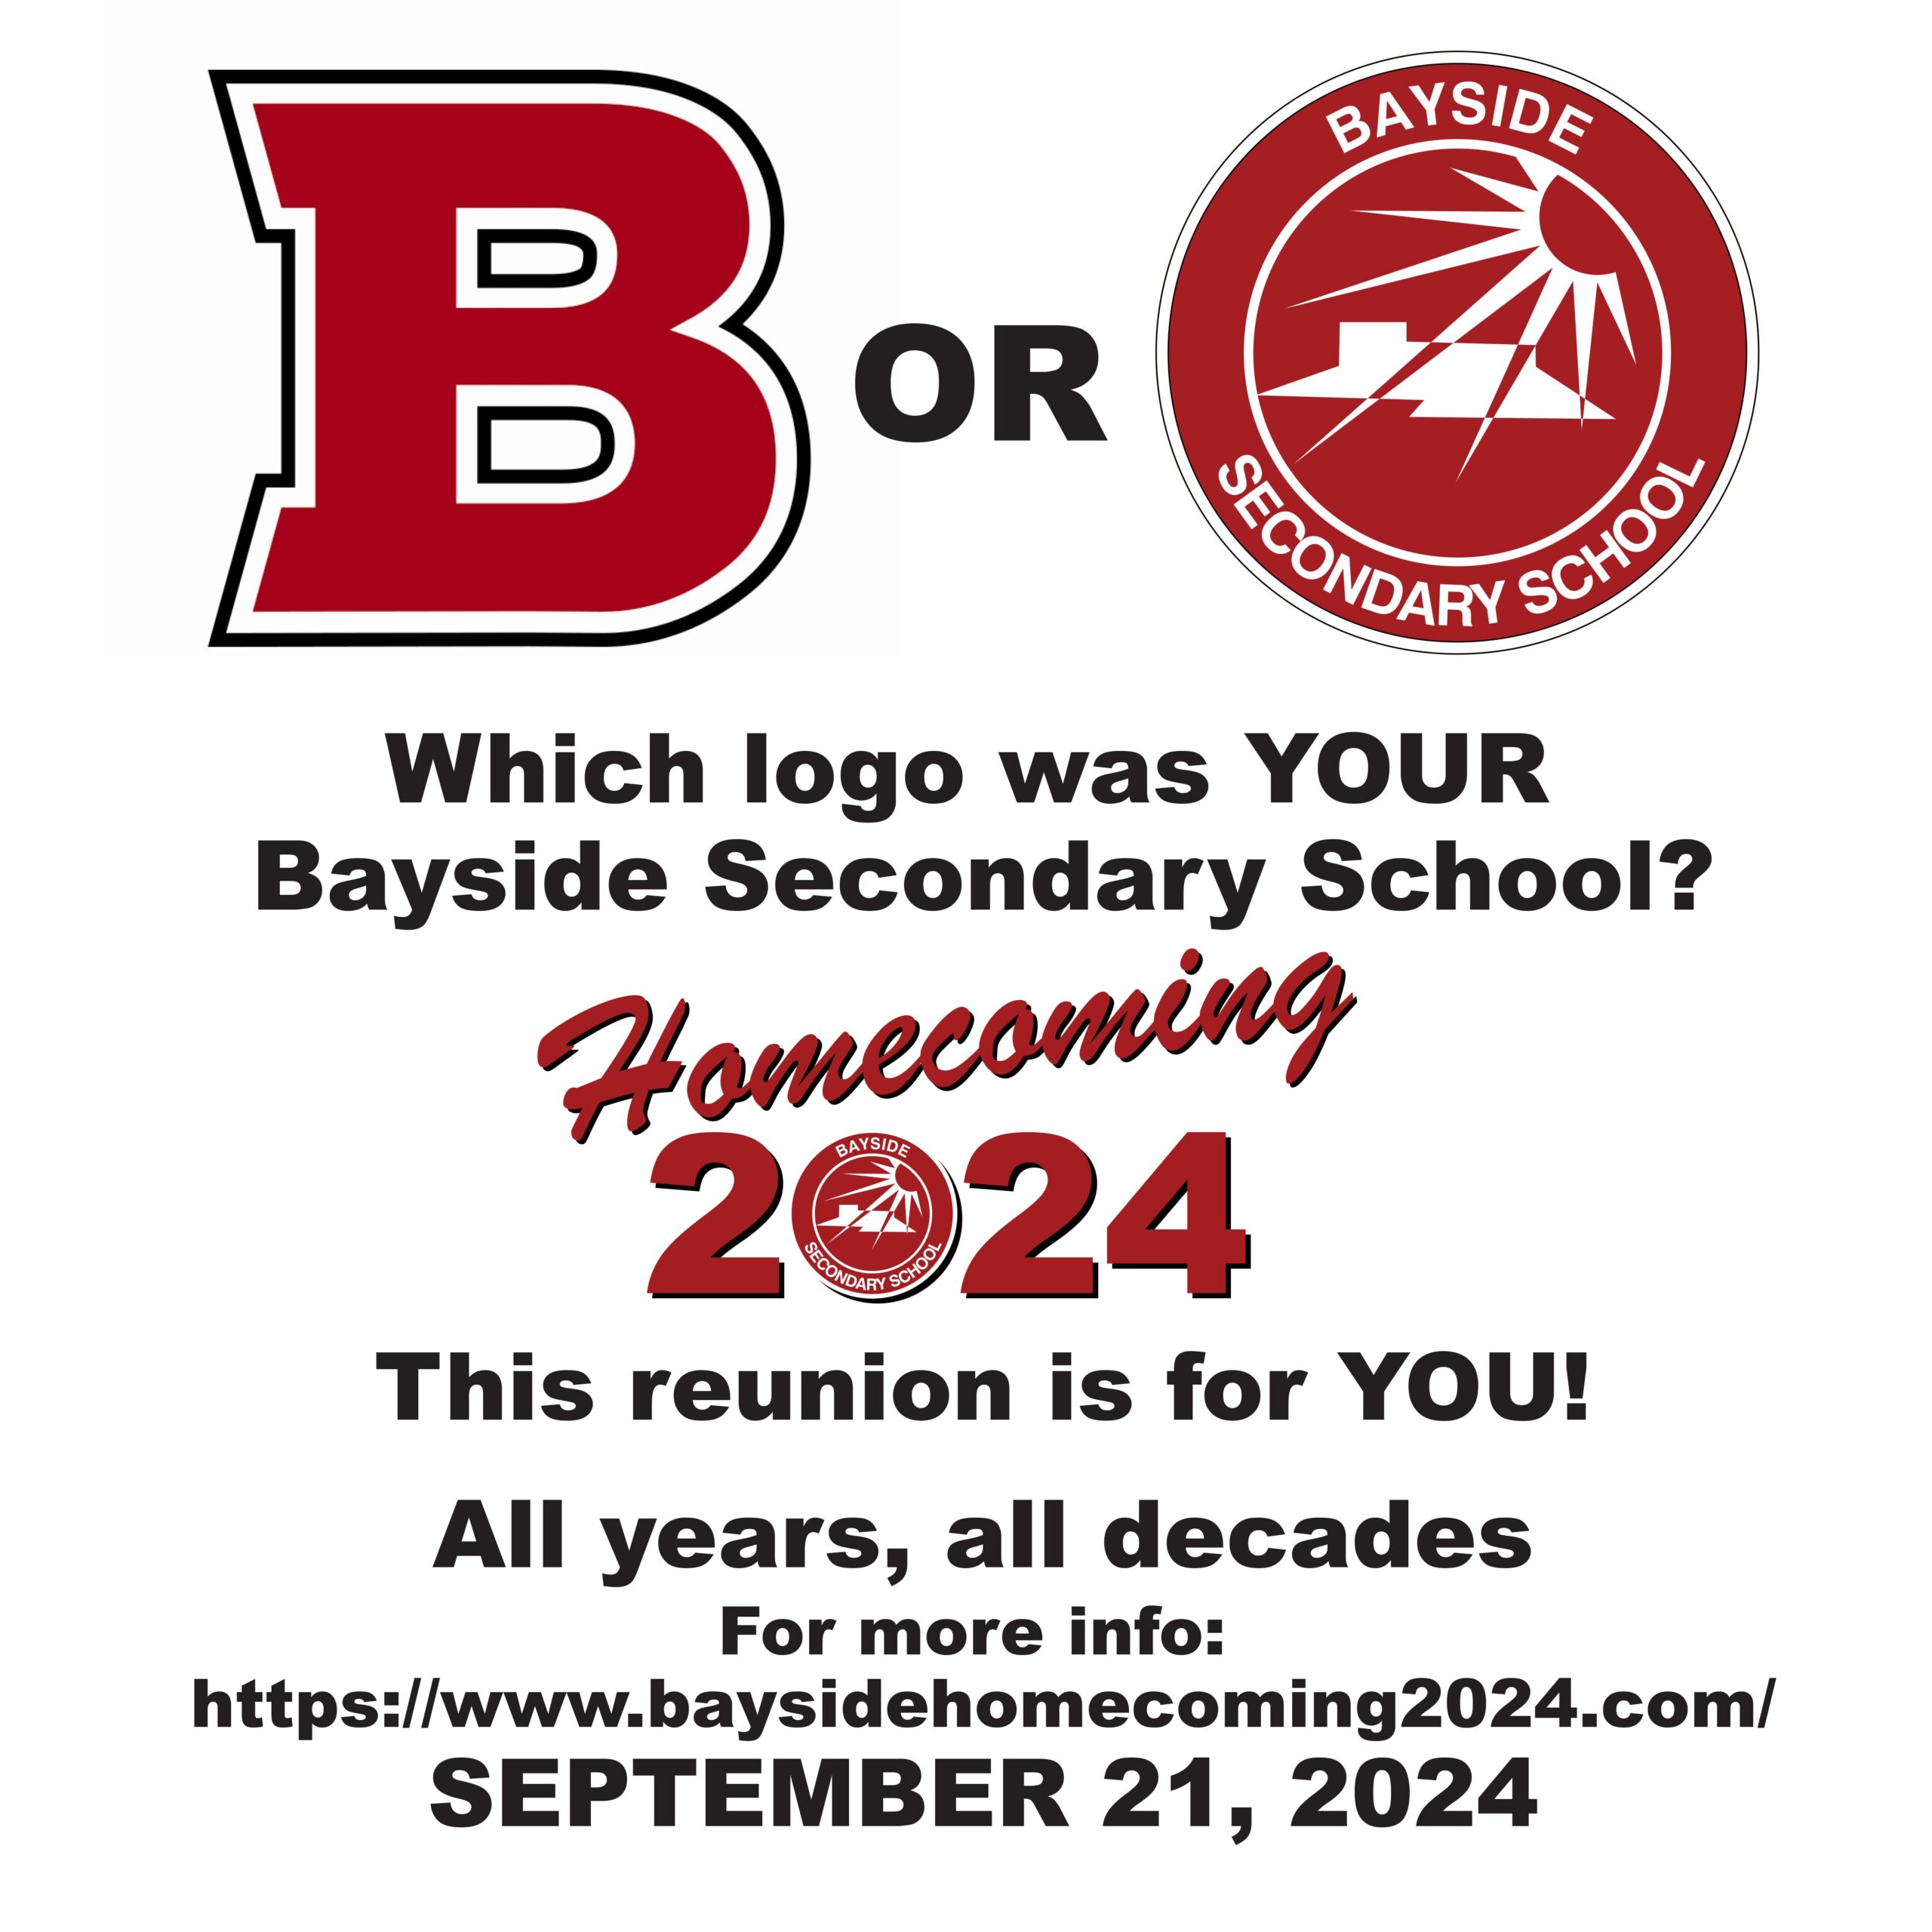 Poster with Bayside school logos and event details.